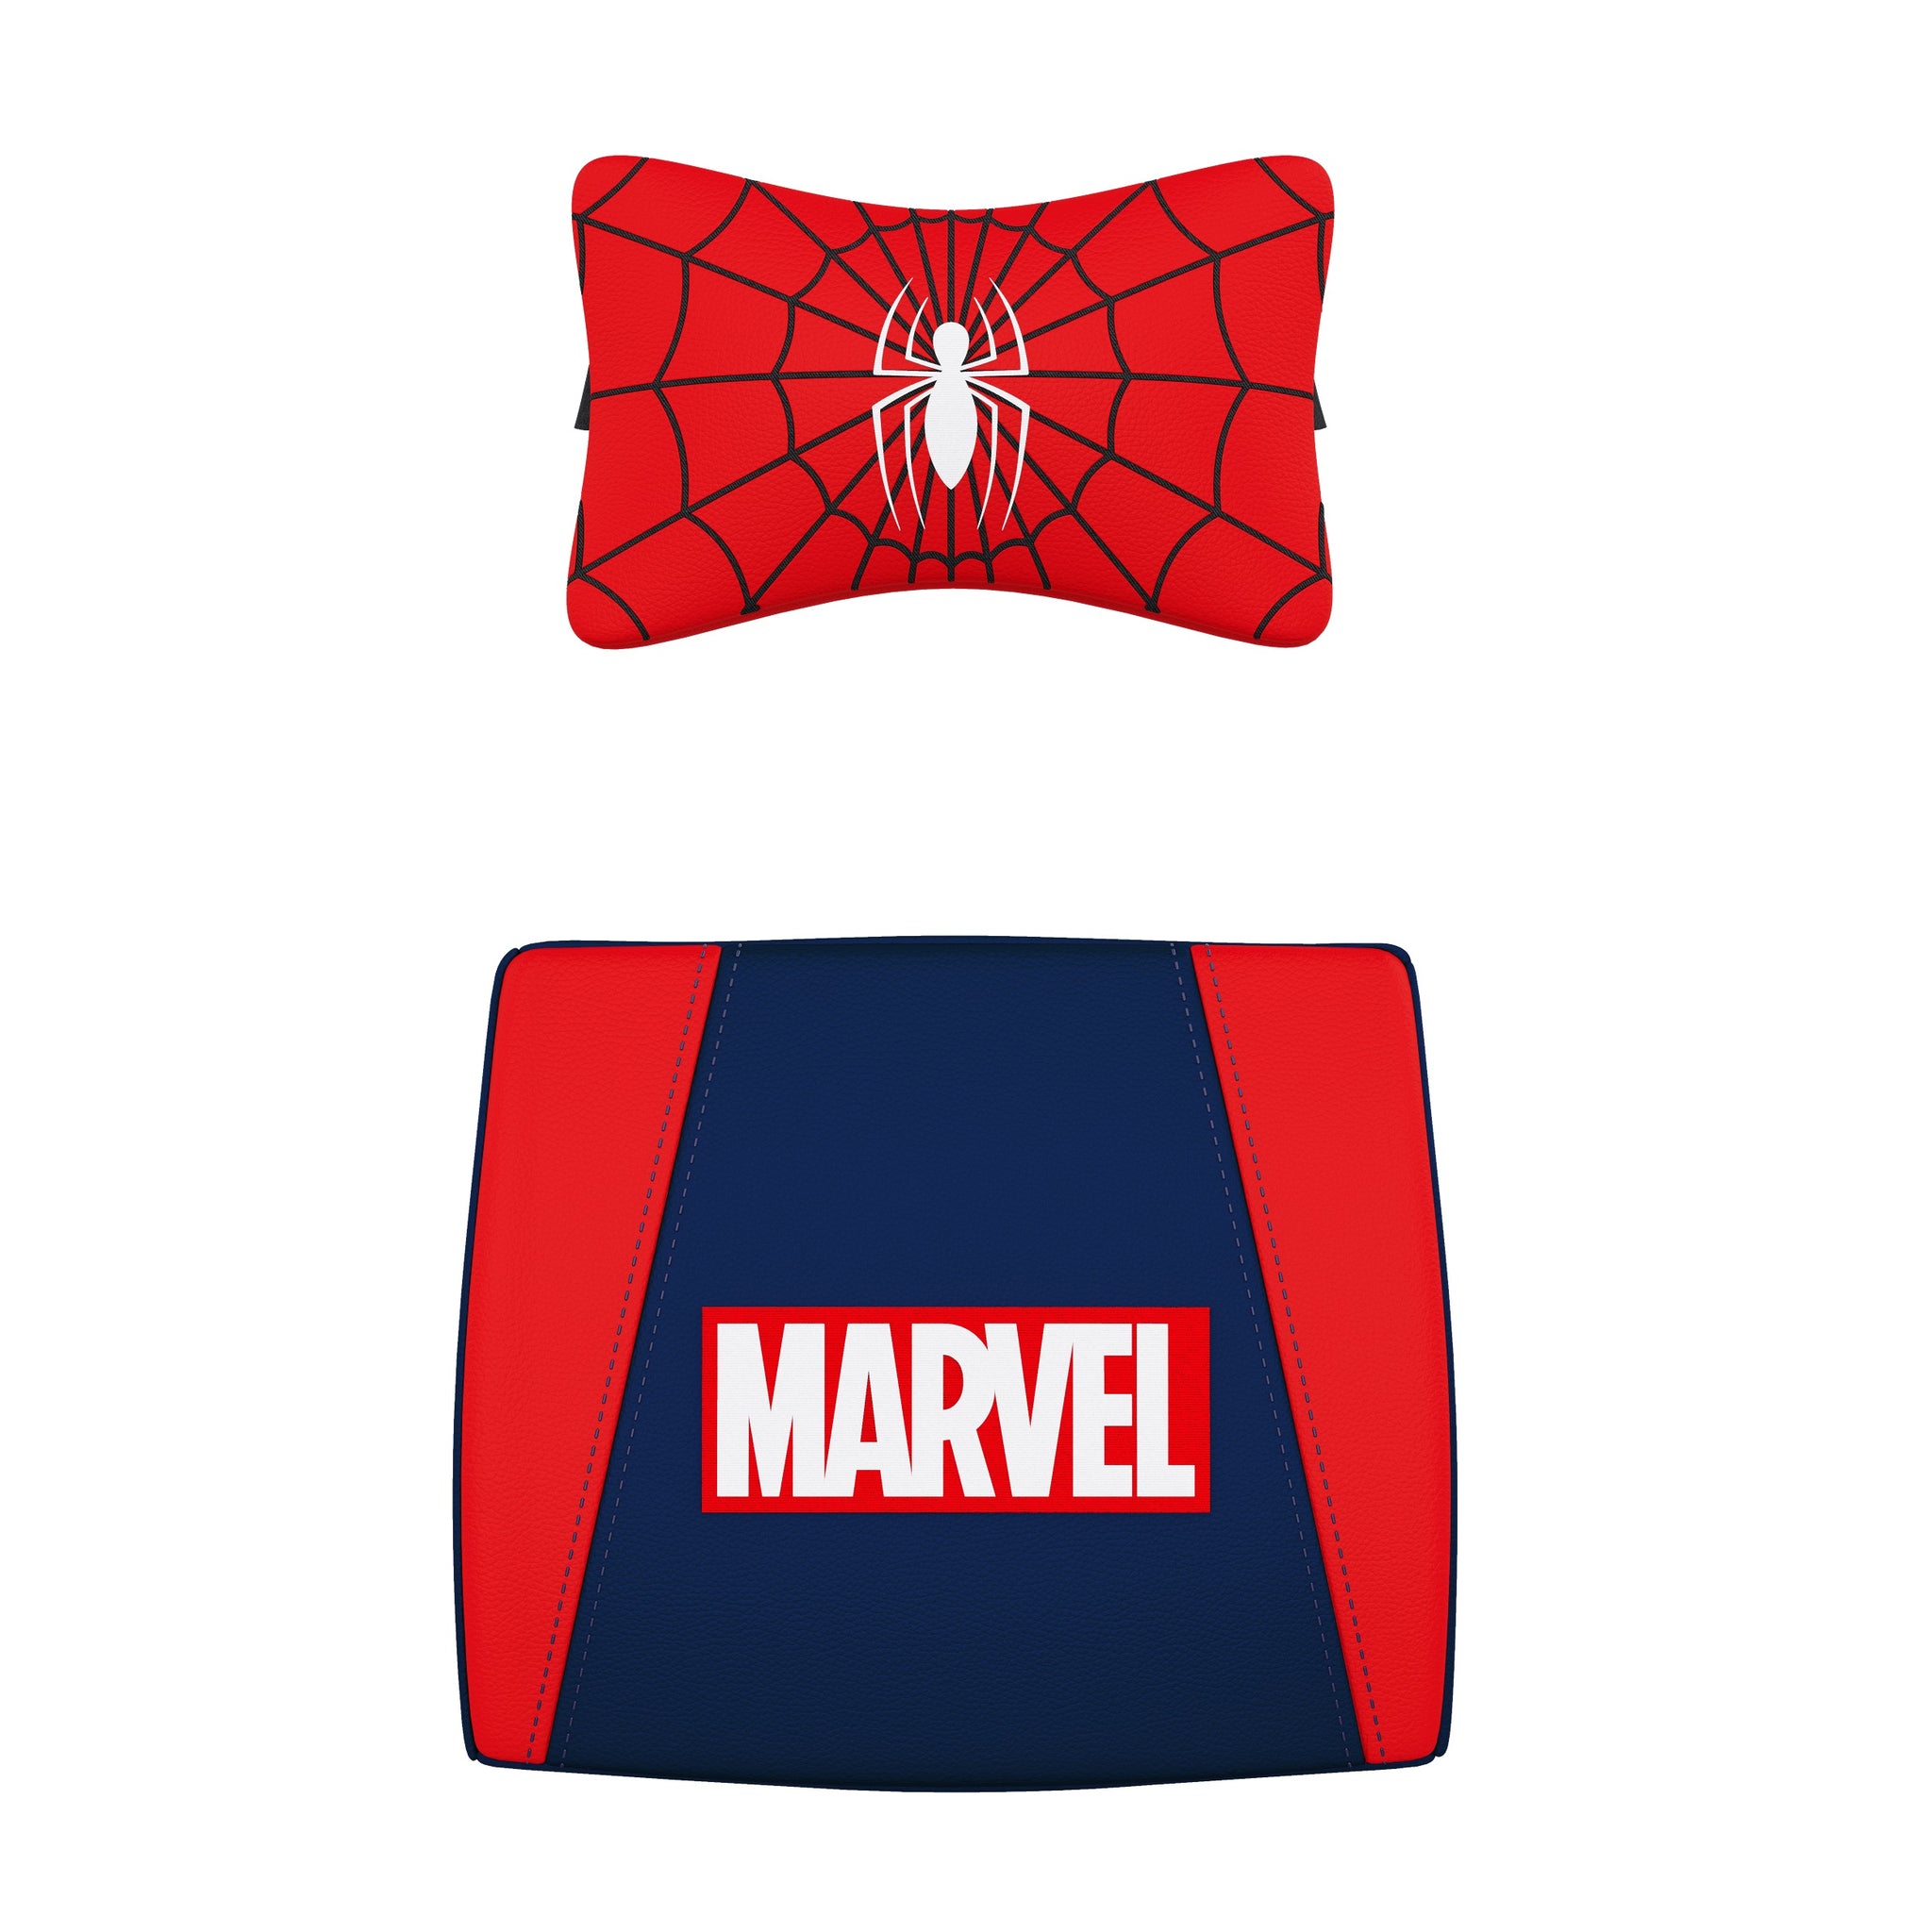 andaseat spider man edition marvel collaboration series